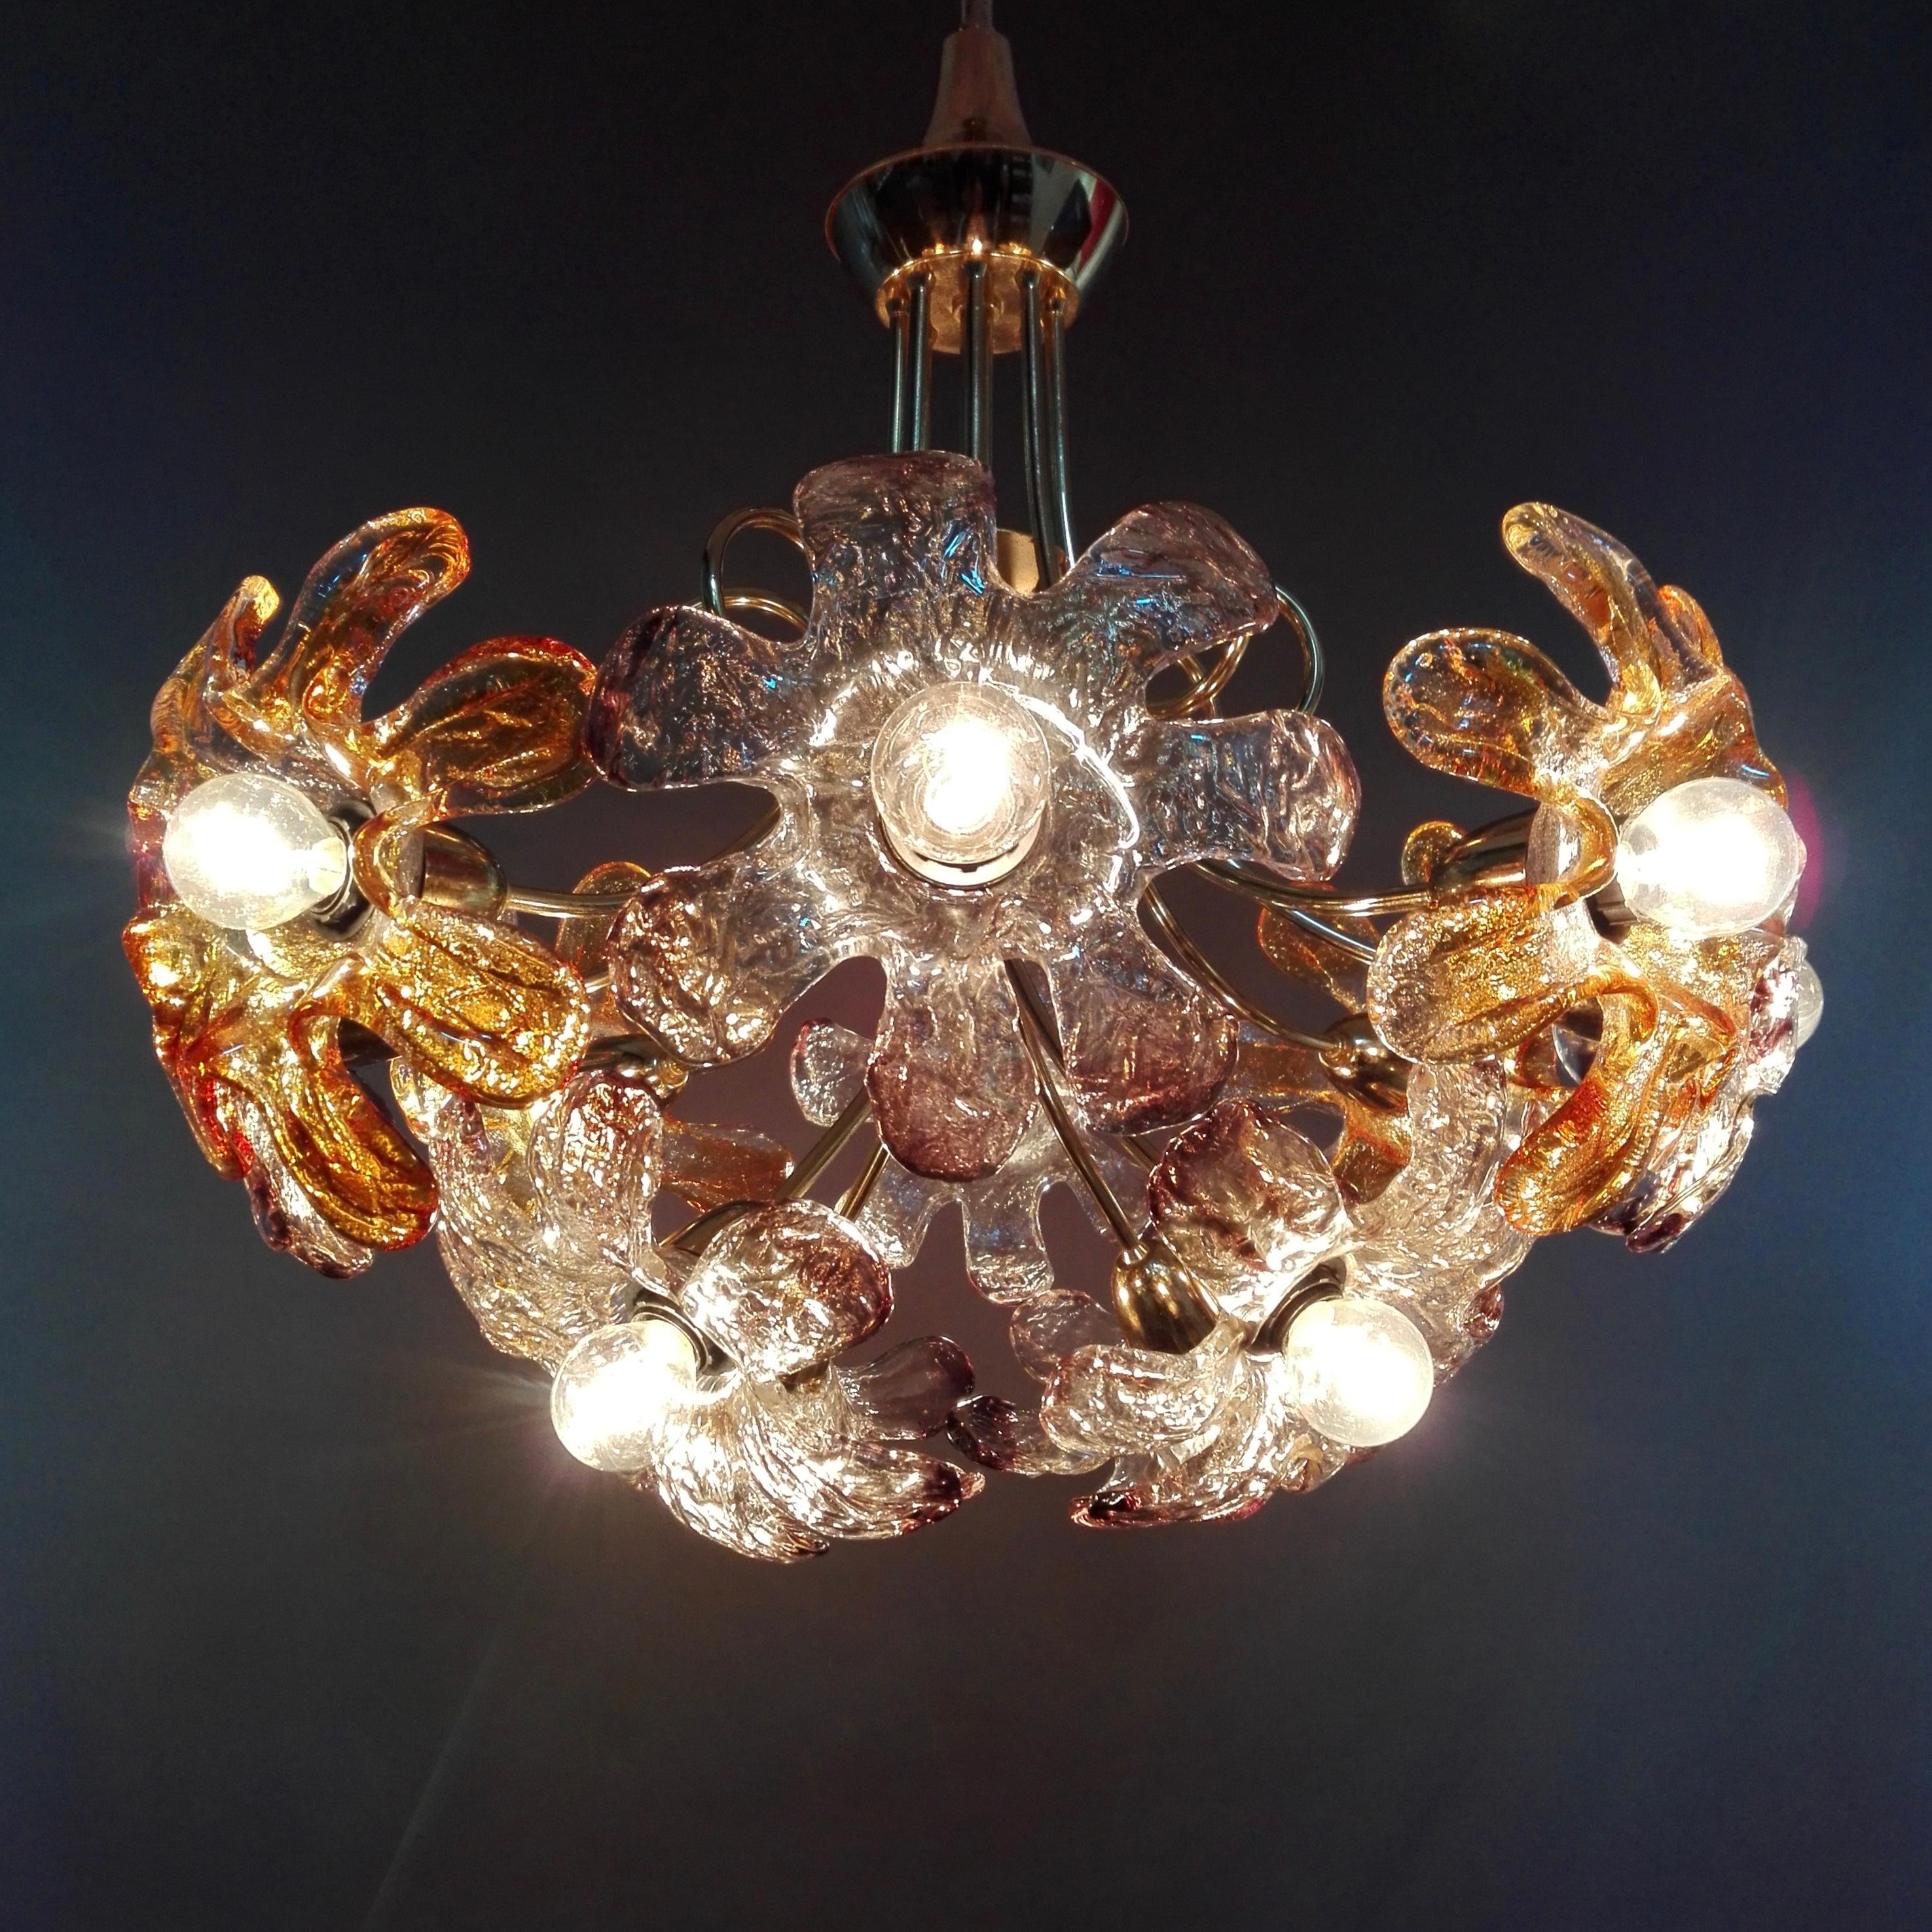 Mid-Century Modern 1960s Mazzega Twelve-Light Chandelier with Flower-Shaped Murano Art Glass Shades For Sale